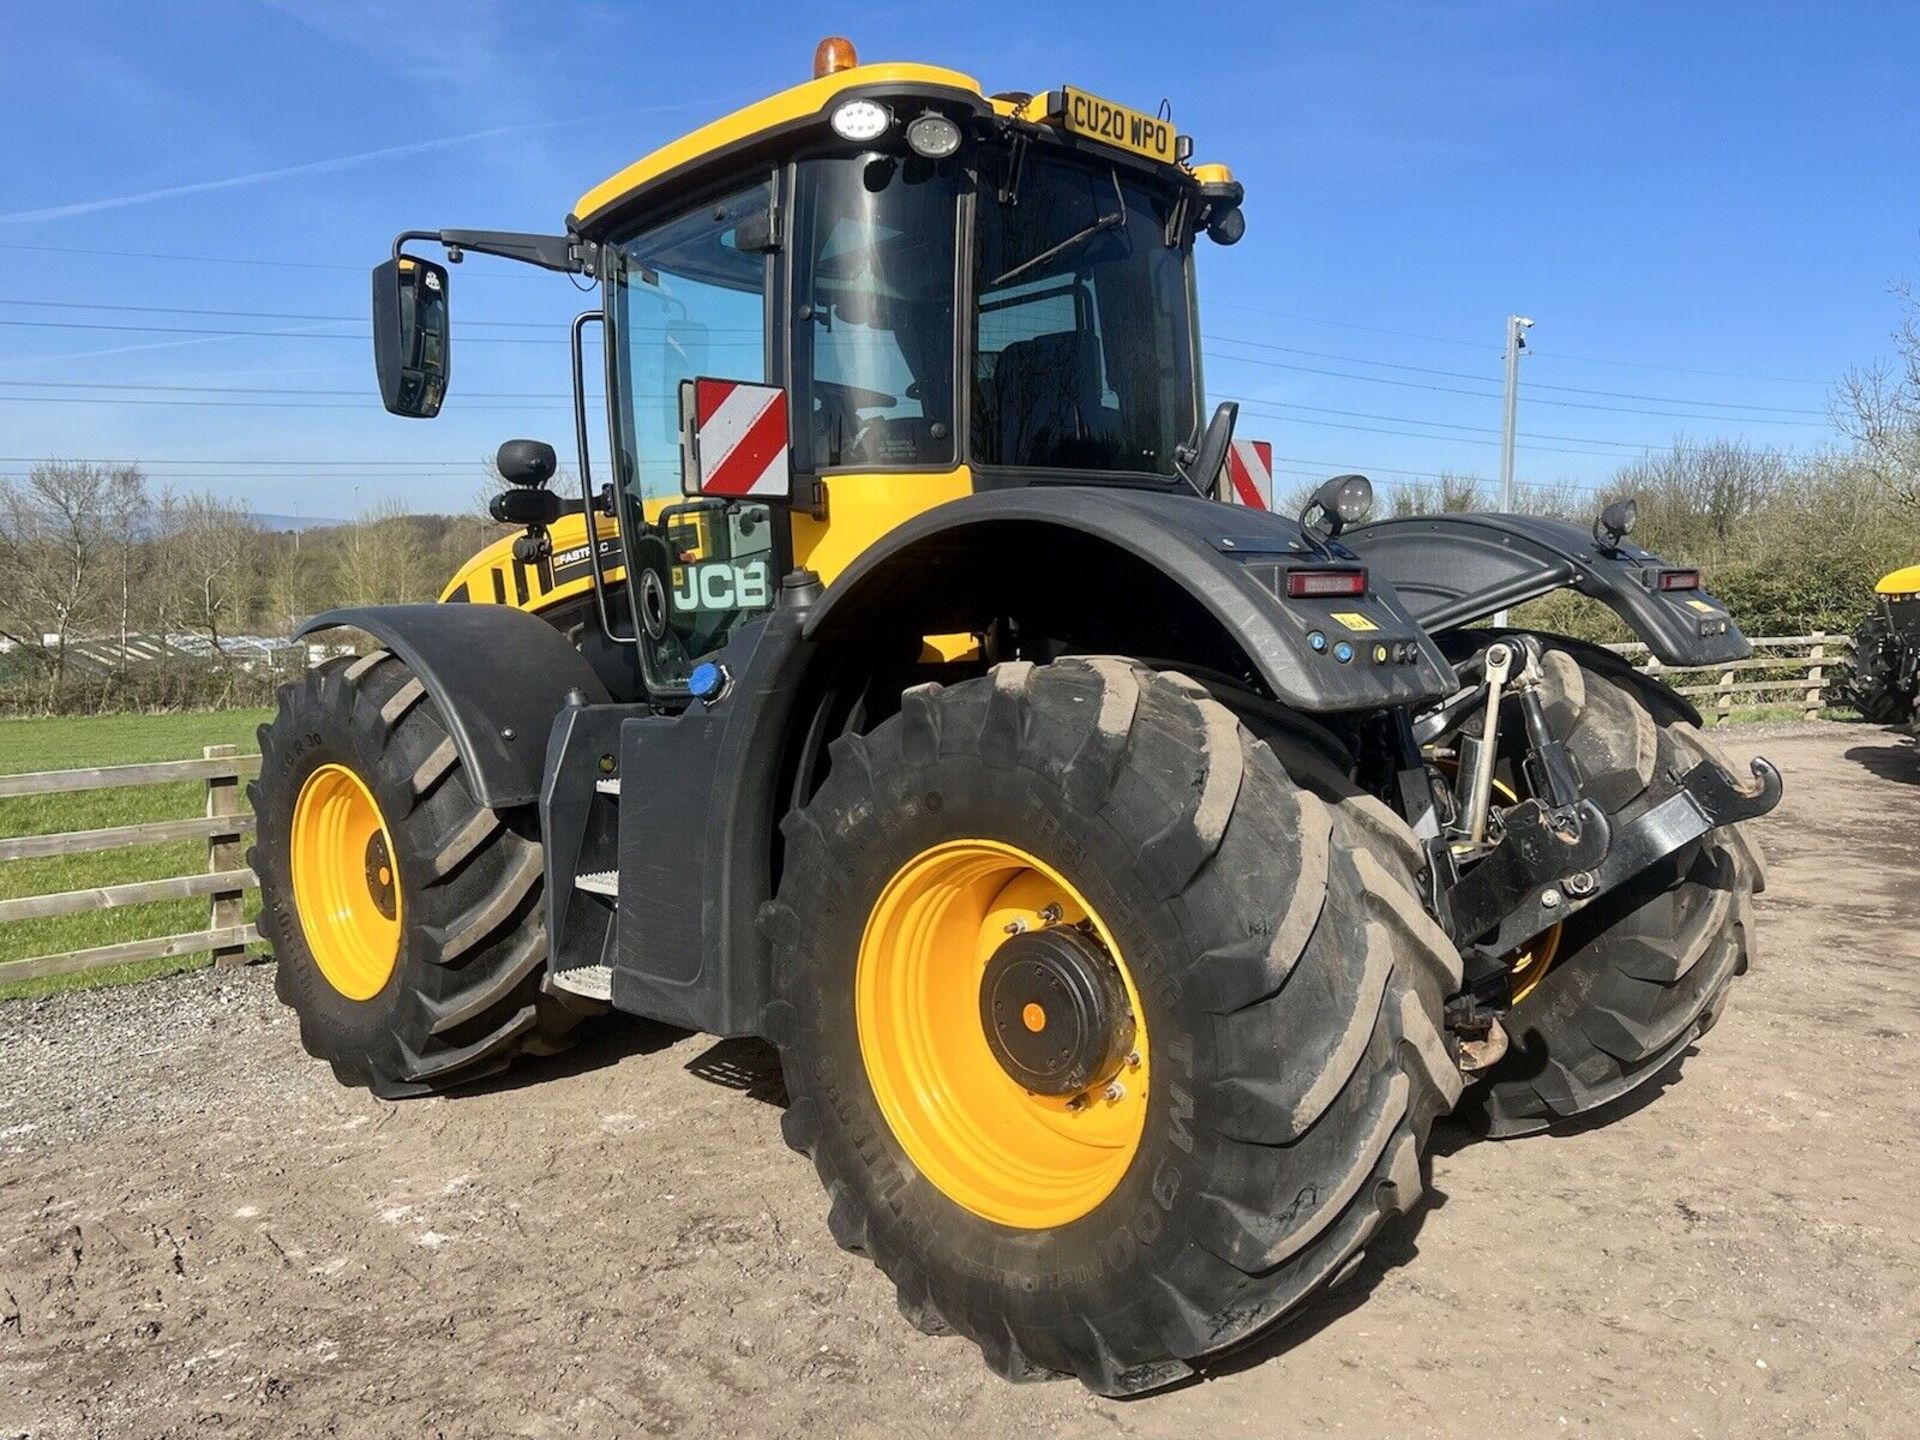 2020 JCB FASTRAC 4220 STAGE V - 1960 HOURS / FIELD PRO PACK / ROAD PERFORMANCE PACK - Image 6 of 12